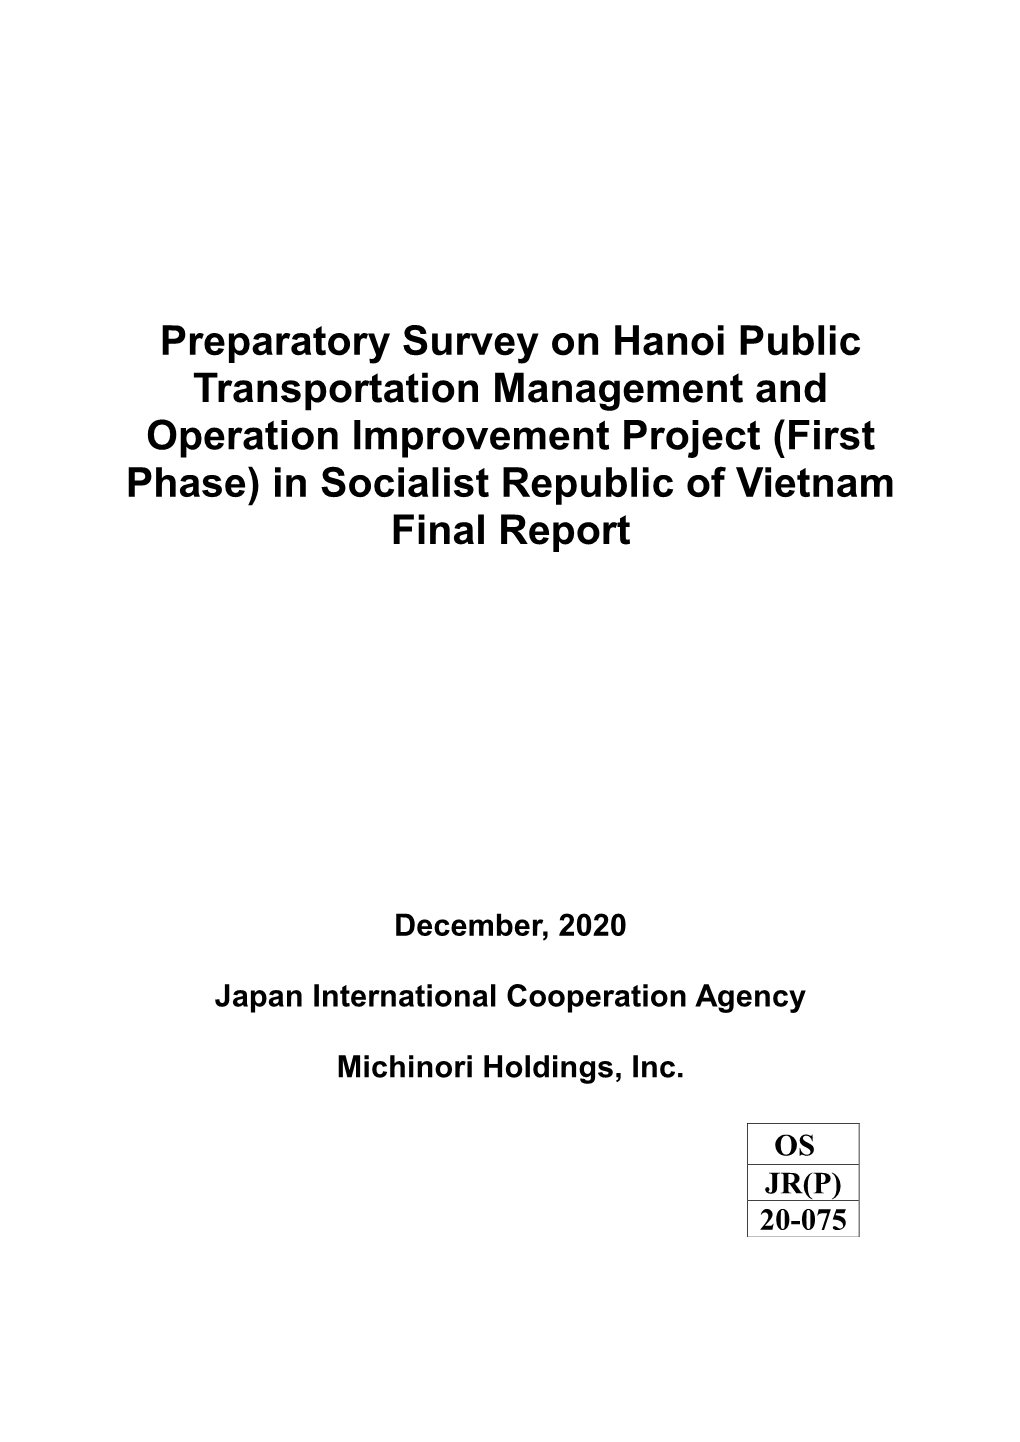 Preparatory Survey on Hanoi Public Transportation Management and Operation Improvement Project (First Phase) in Socialist Republic of Vietnam Final Report